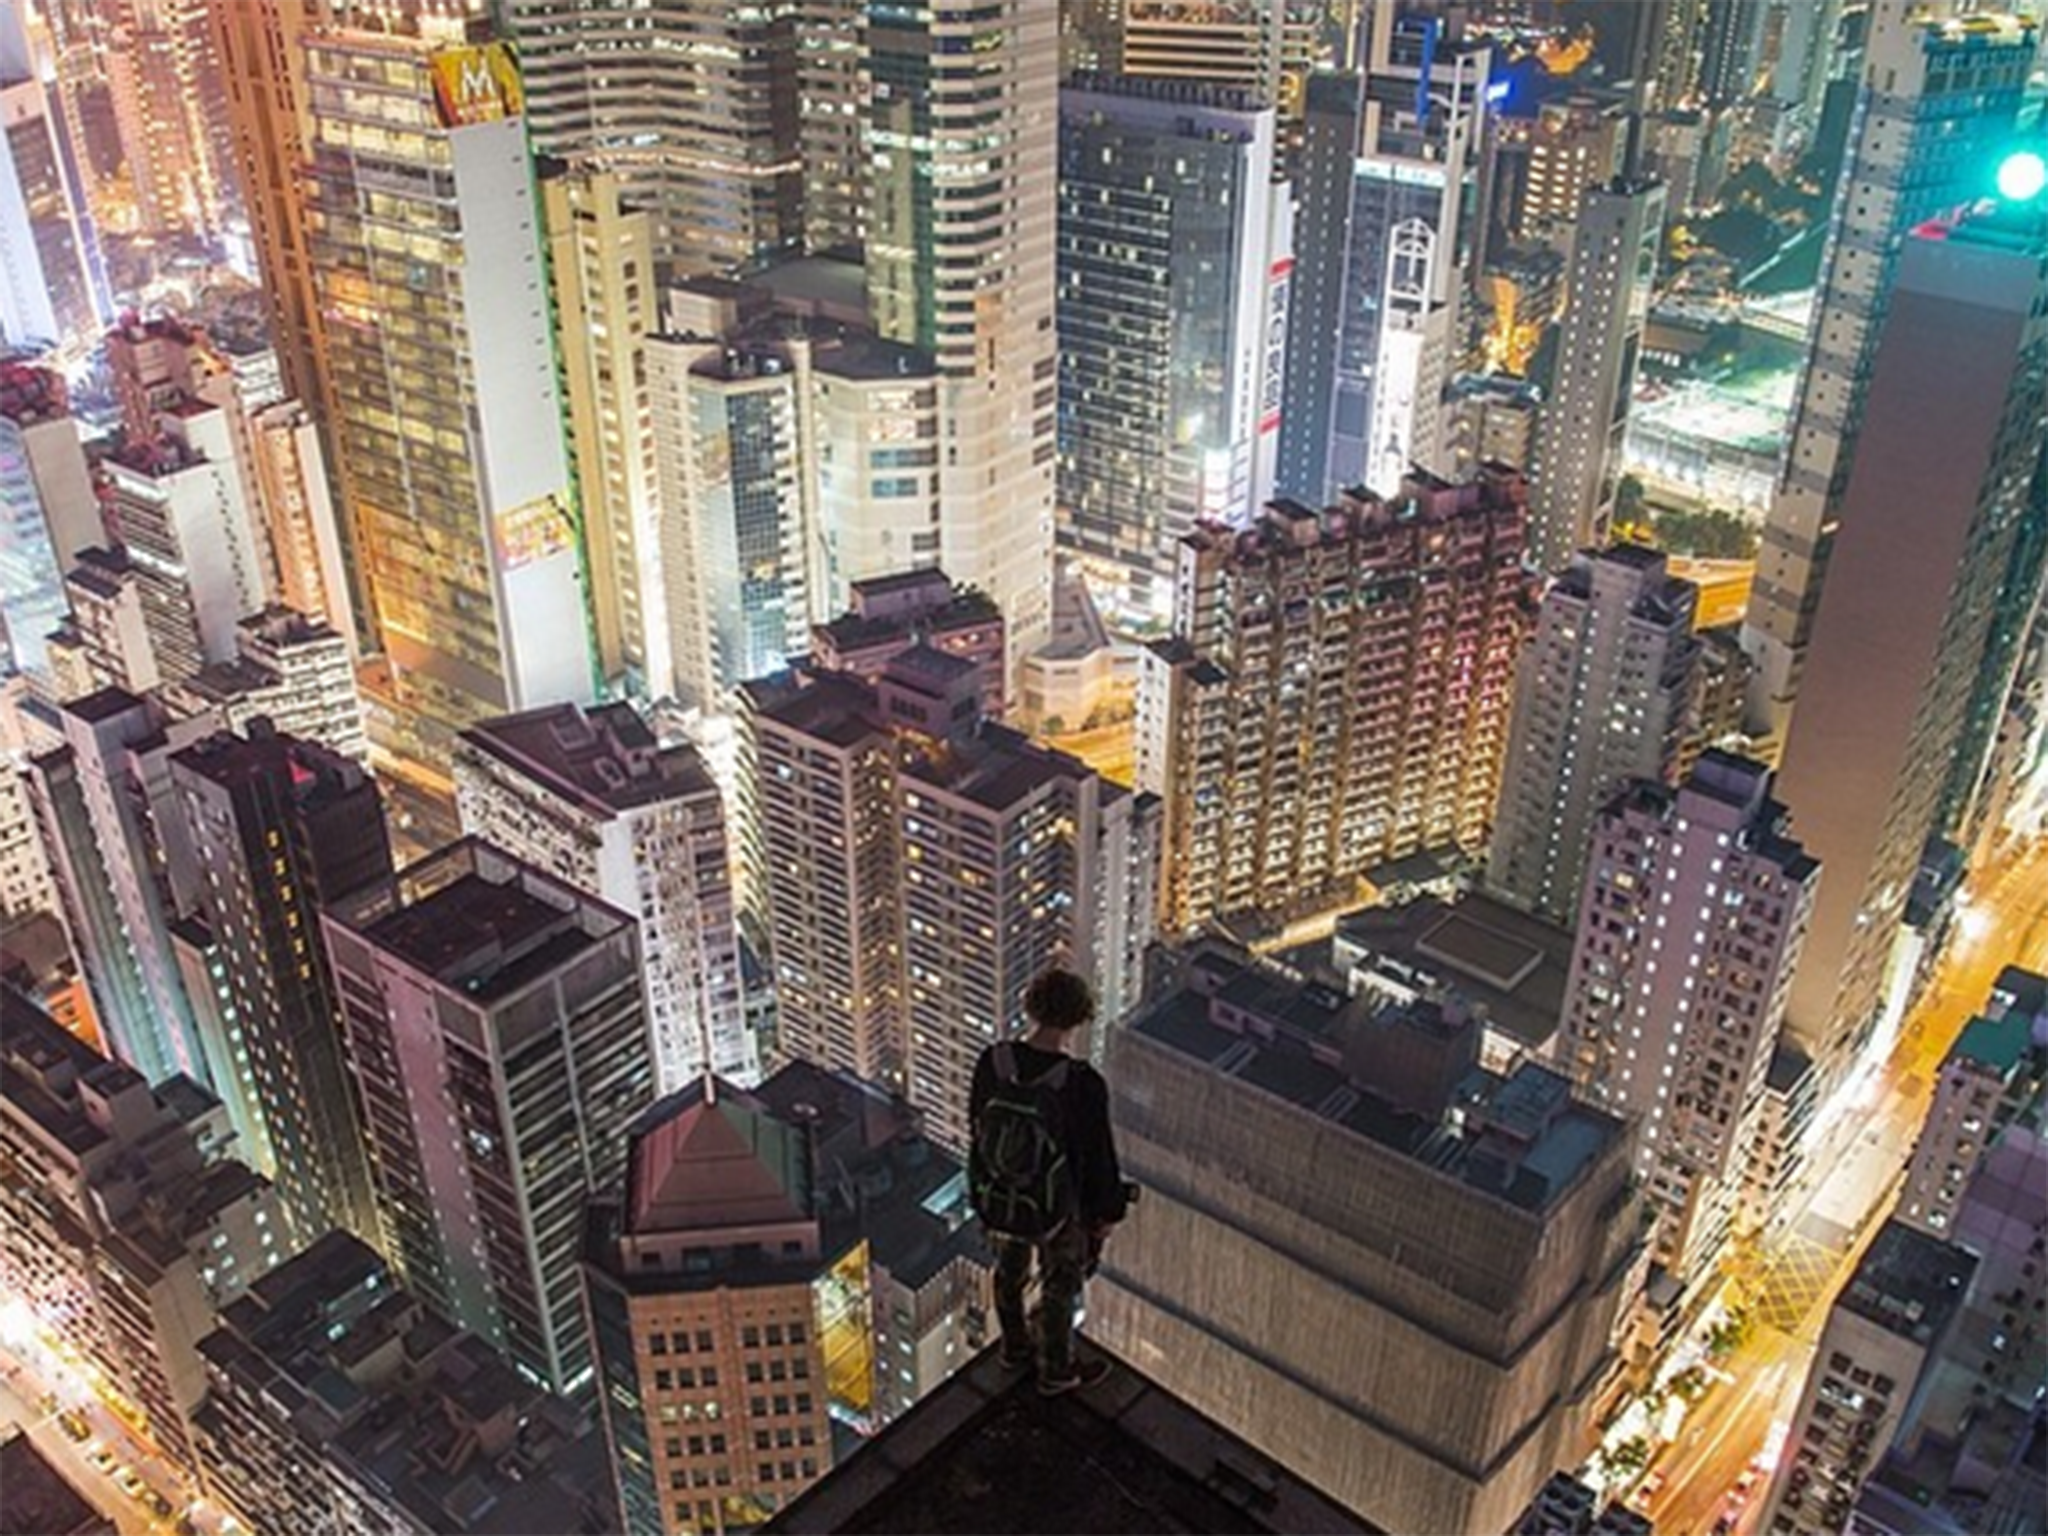 Instagram daredevils get thousands of followers